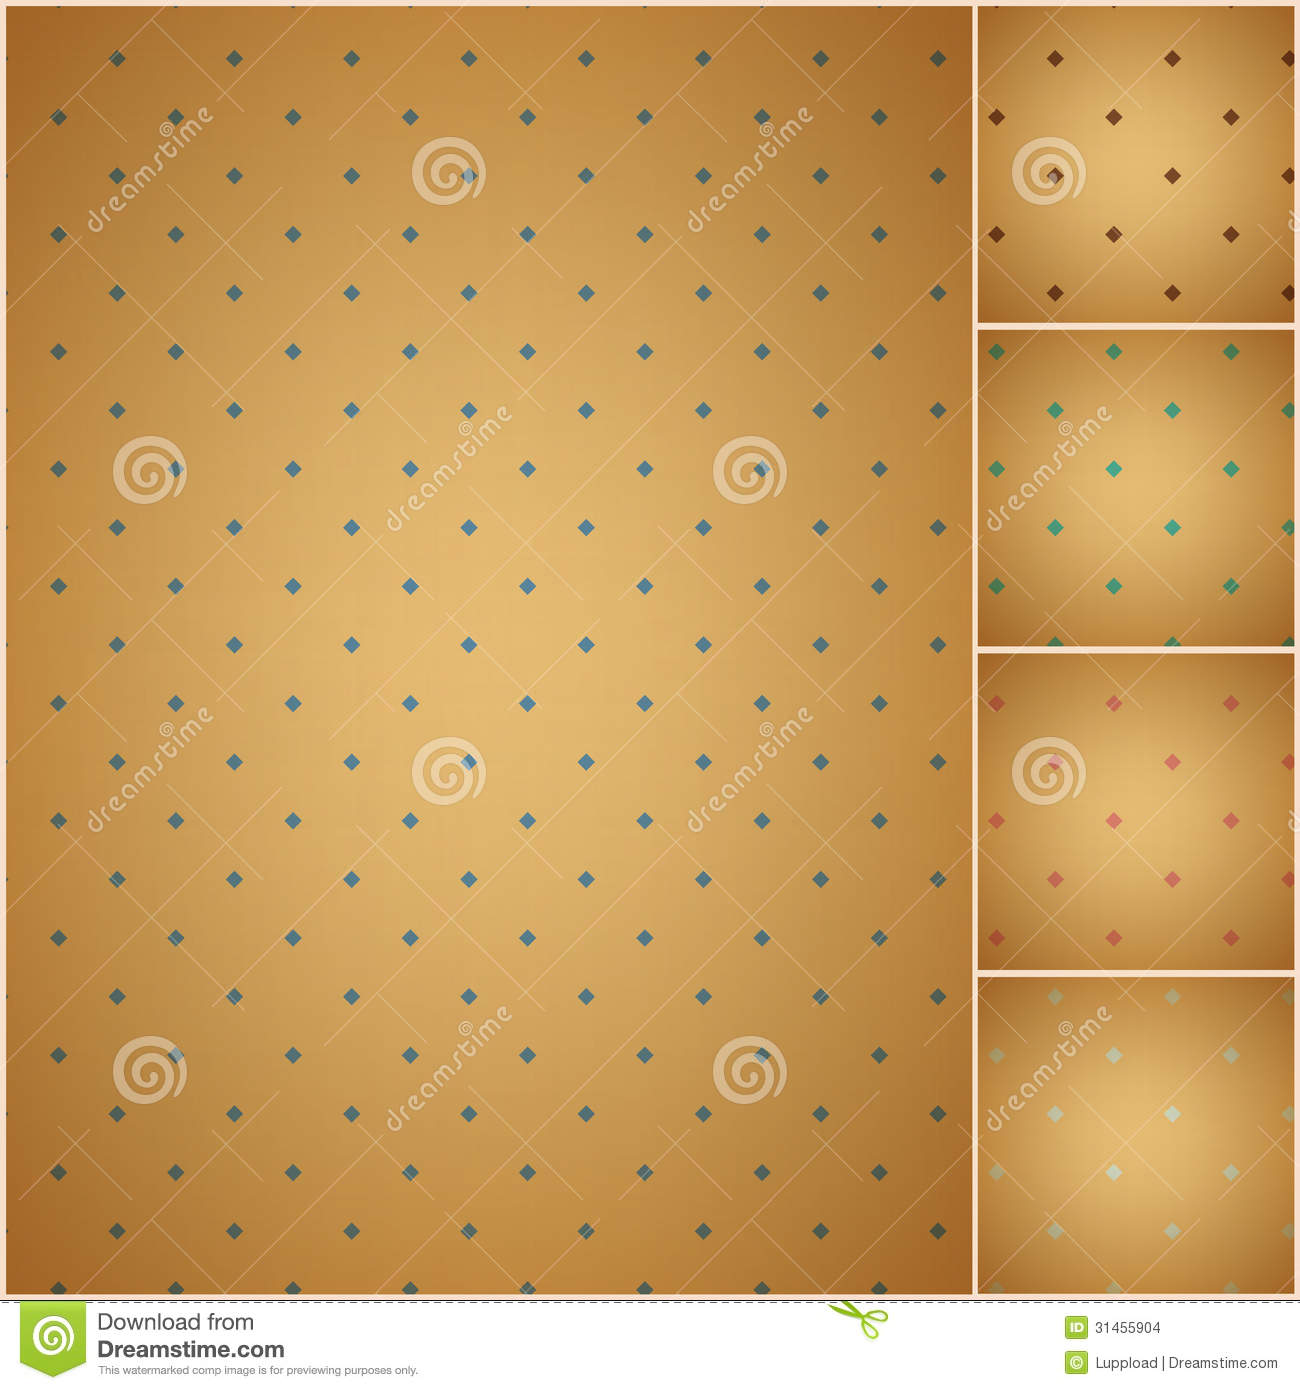 Faded Colorful Polka Dot Seamless Textured Pattern Stock Images